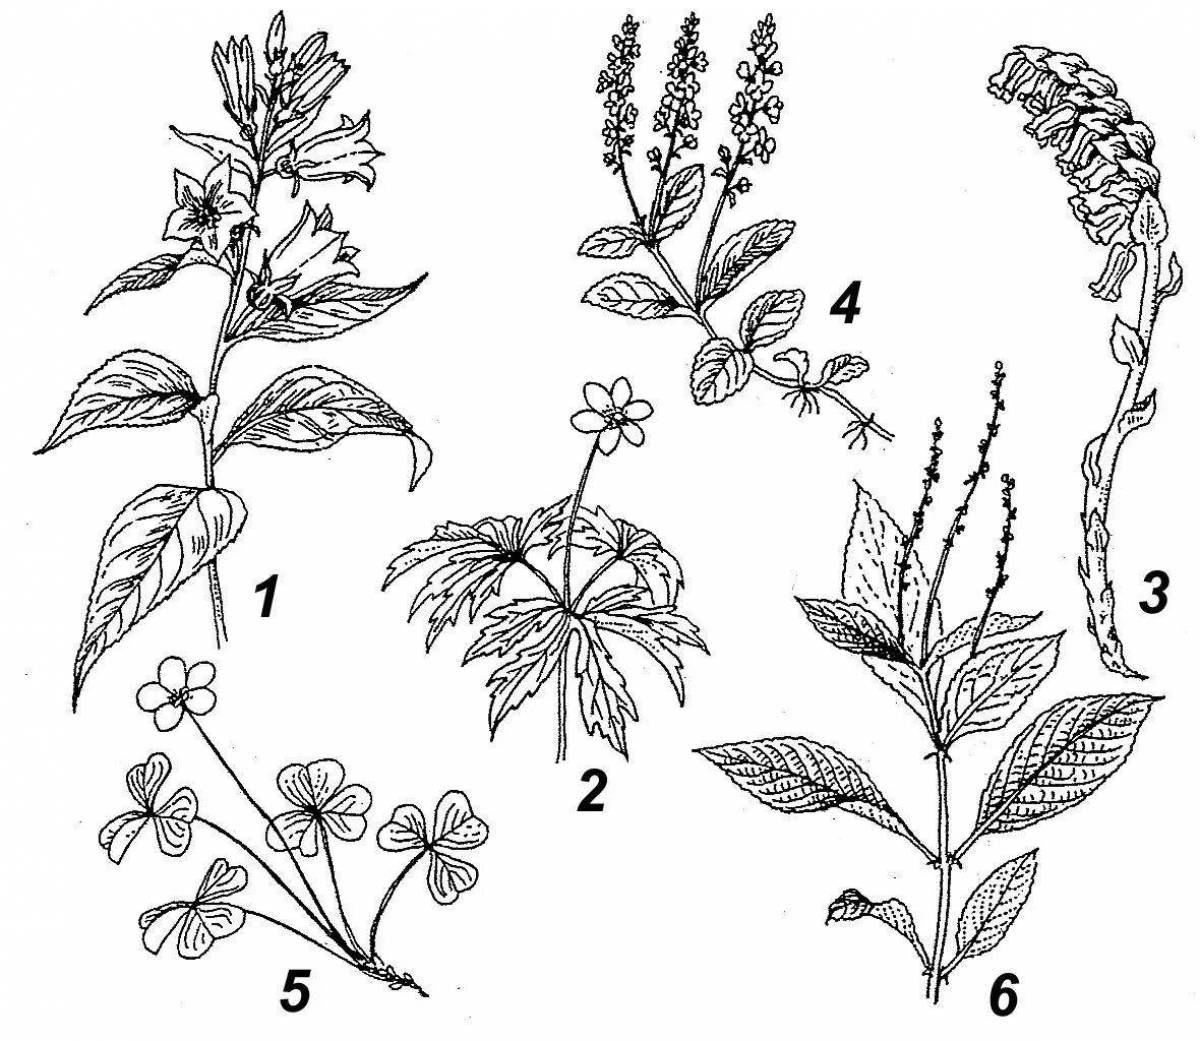 Exquisite coloring of medicinal plants